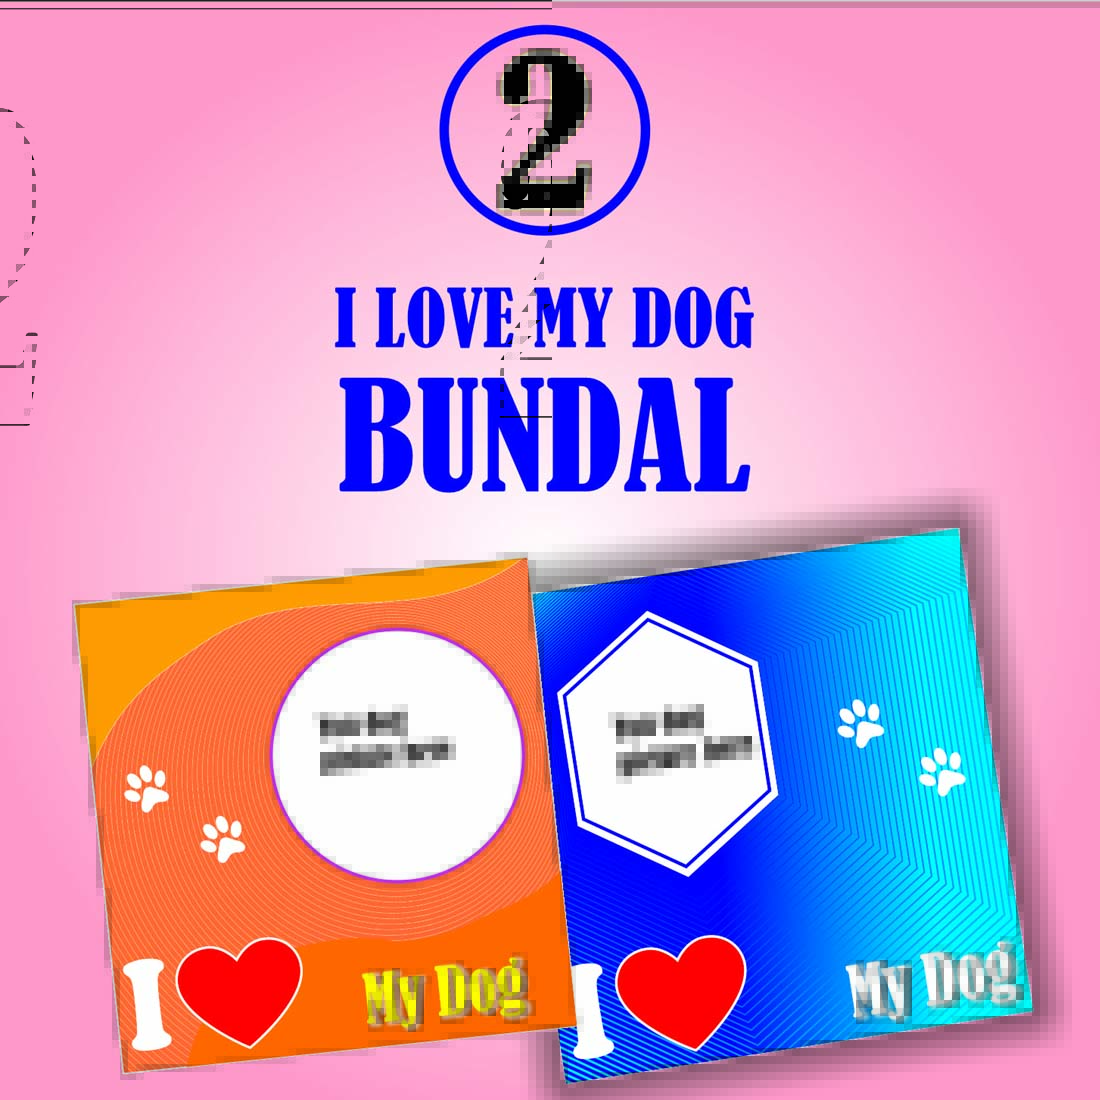 I love my Dog (2 picture Bundal) preview image.